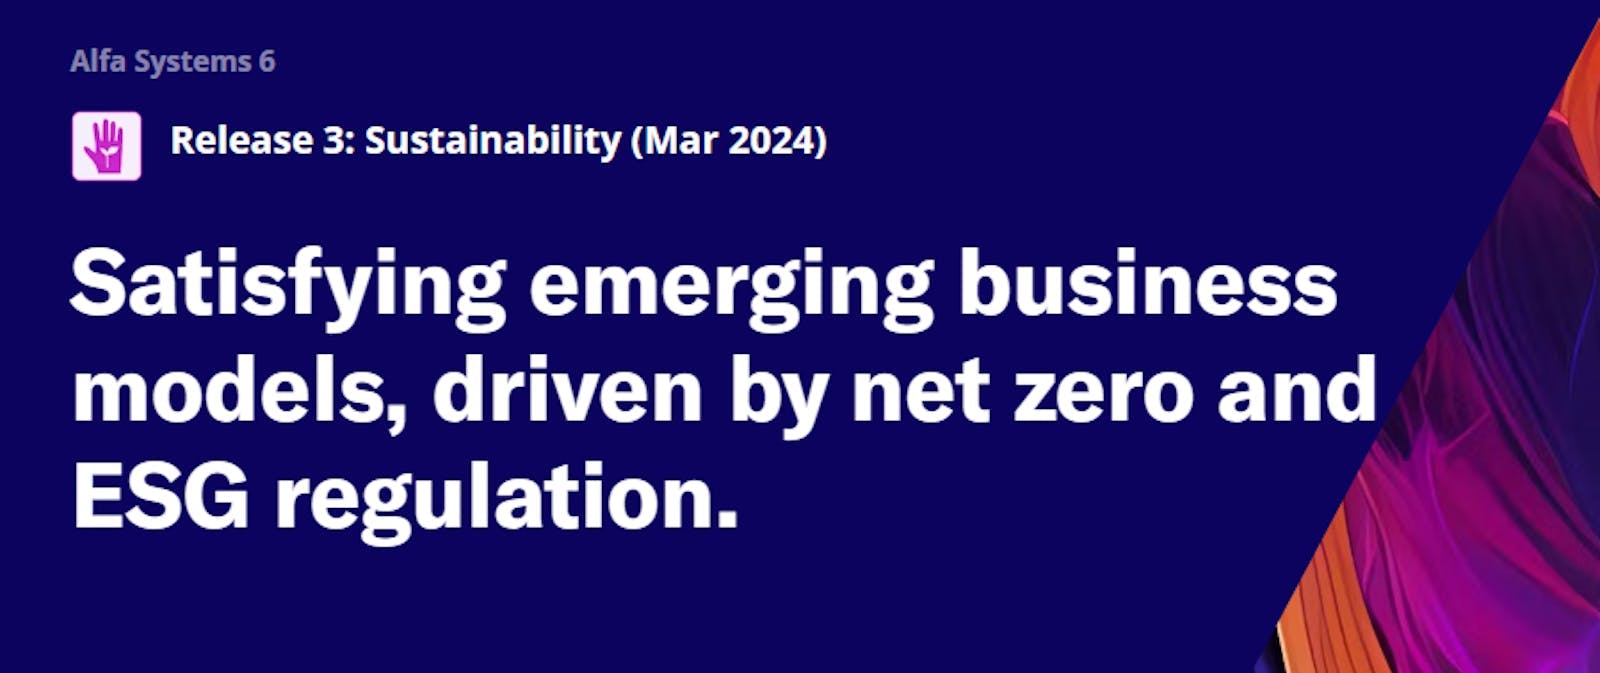 Banner that reads "Sustainability: satisfying emerging business models, driven by net zero and ESG regulation"